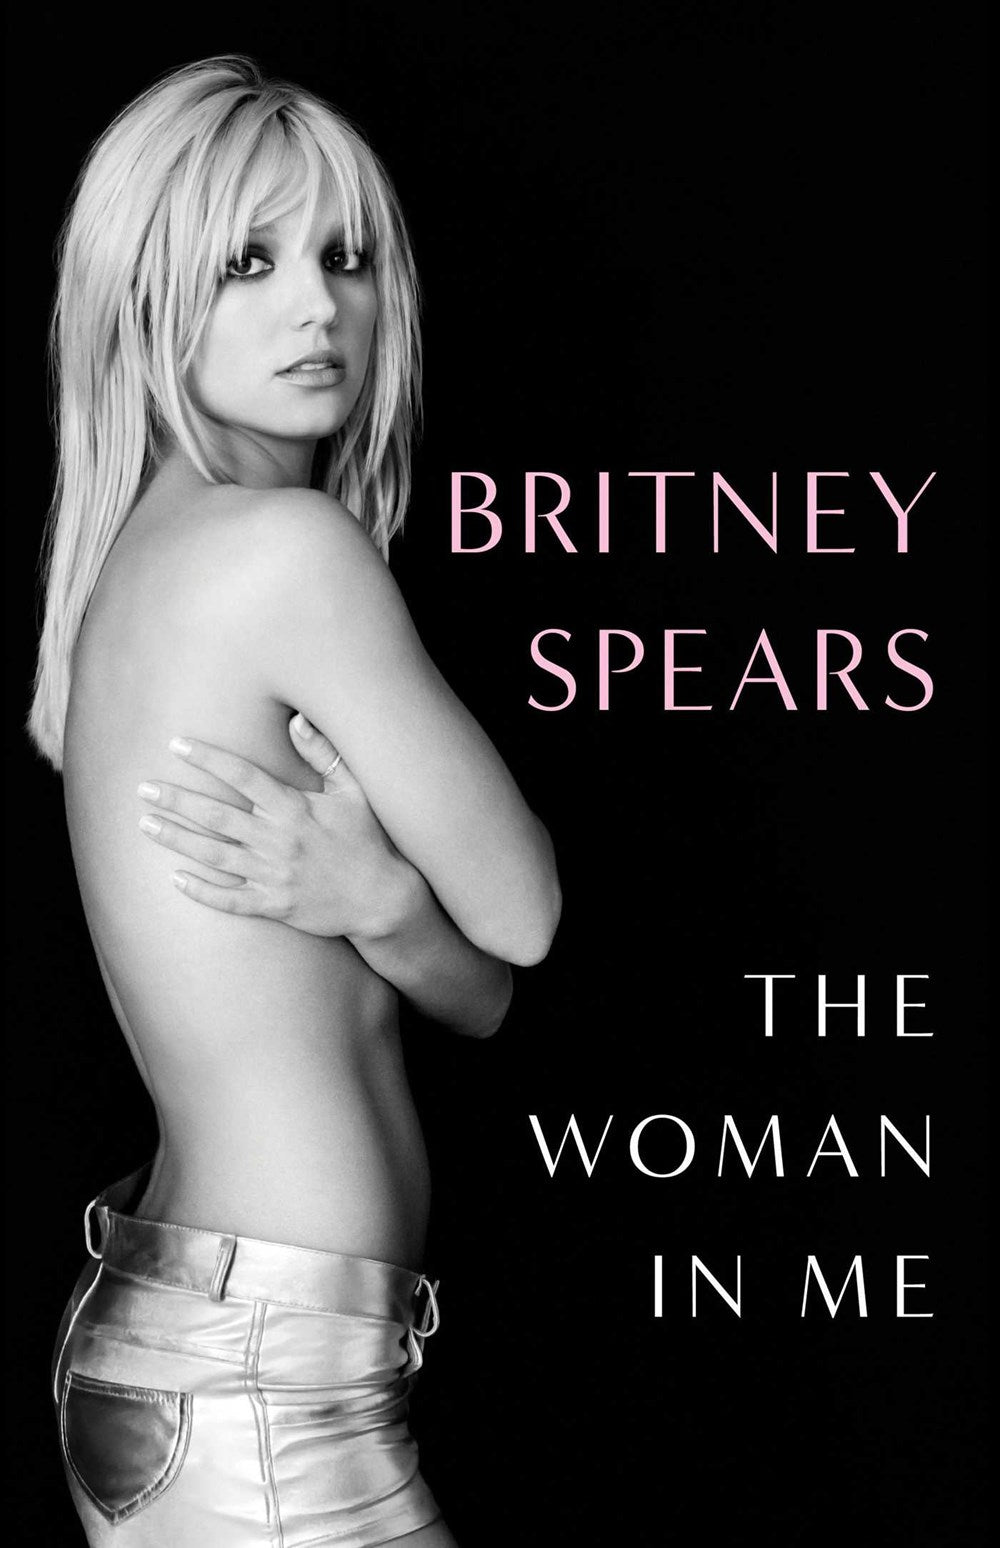 The Woman In Me by Britney Spears (10/24/23)